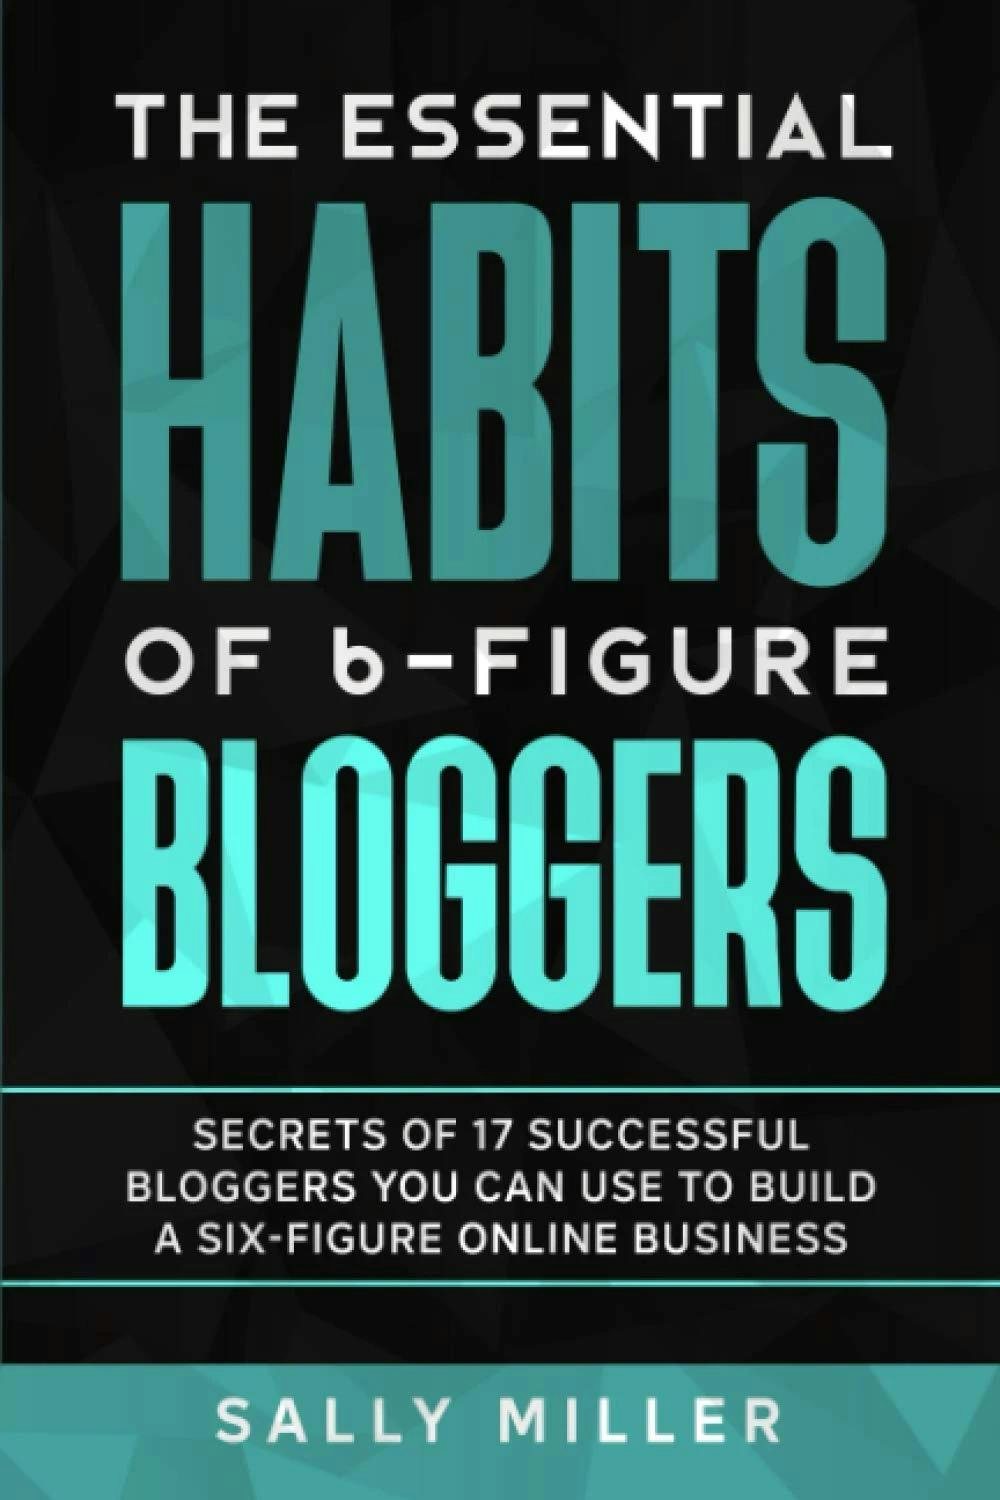 The Essential Habits of 6-Figure Bloggers by Sally Miller